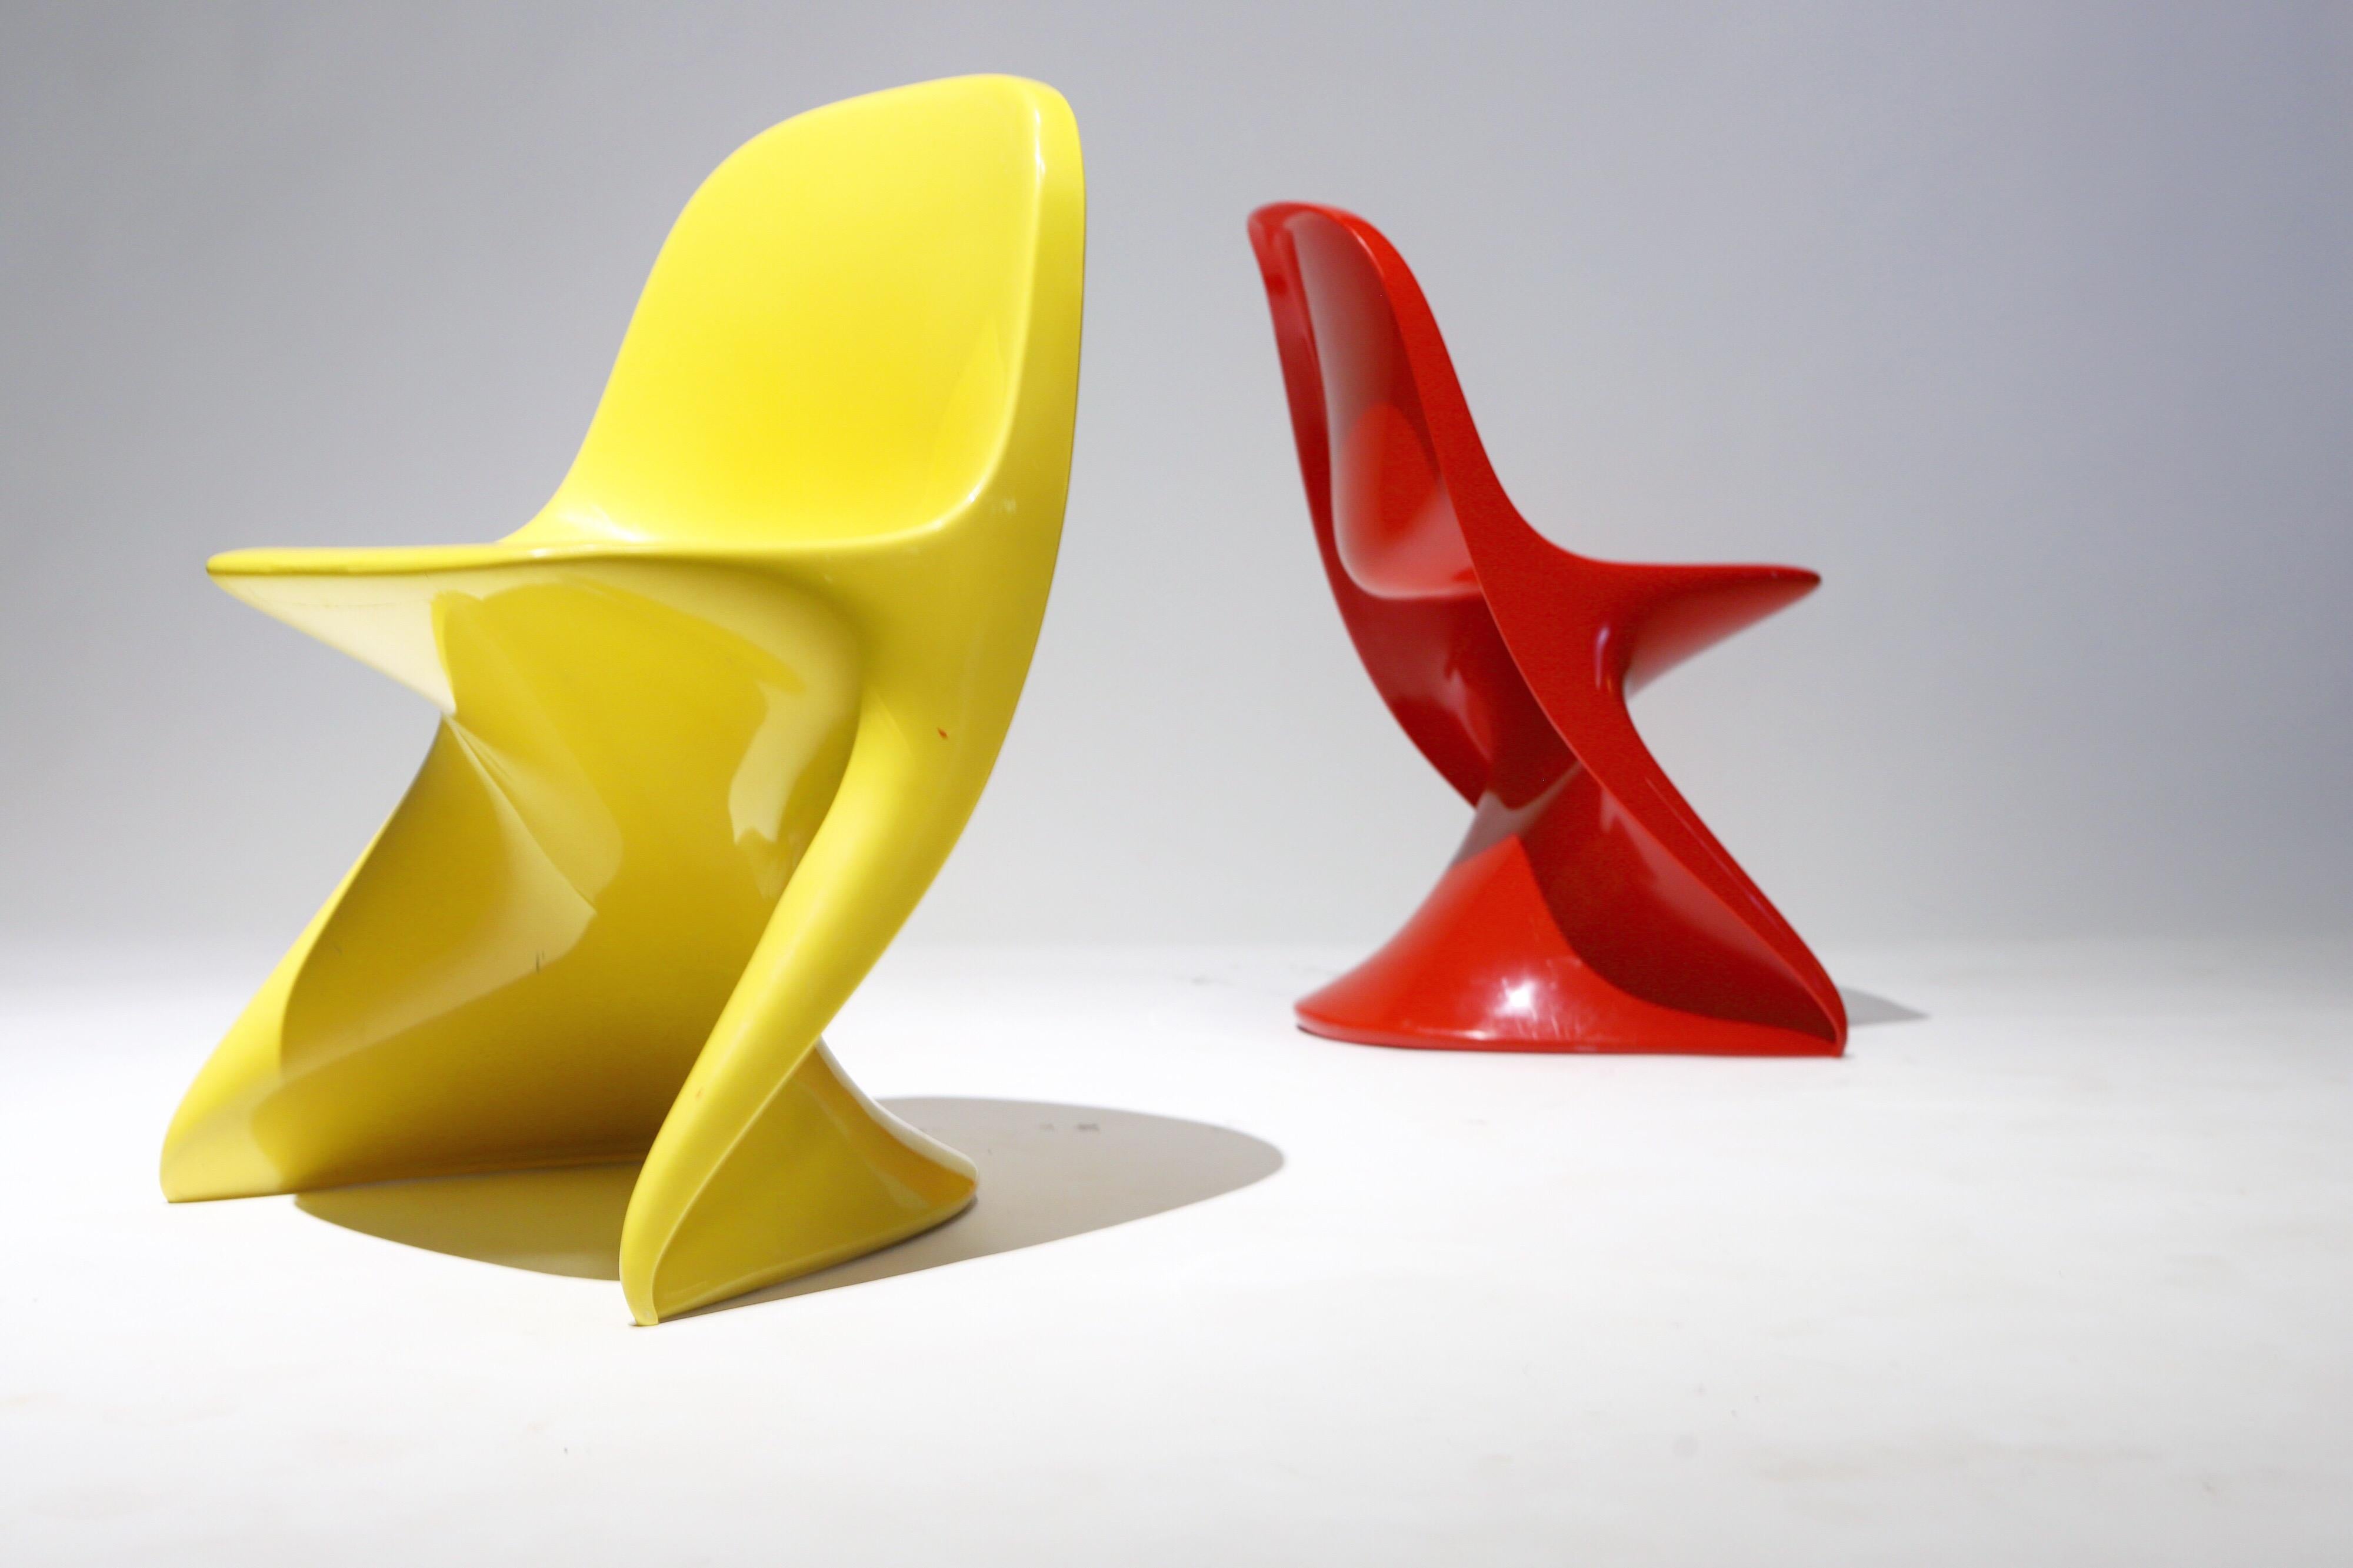 Super fun Space Age child's chair by Alexander Begge for Casala. Yellow is no longer available. Listing is for red chair only.